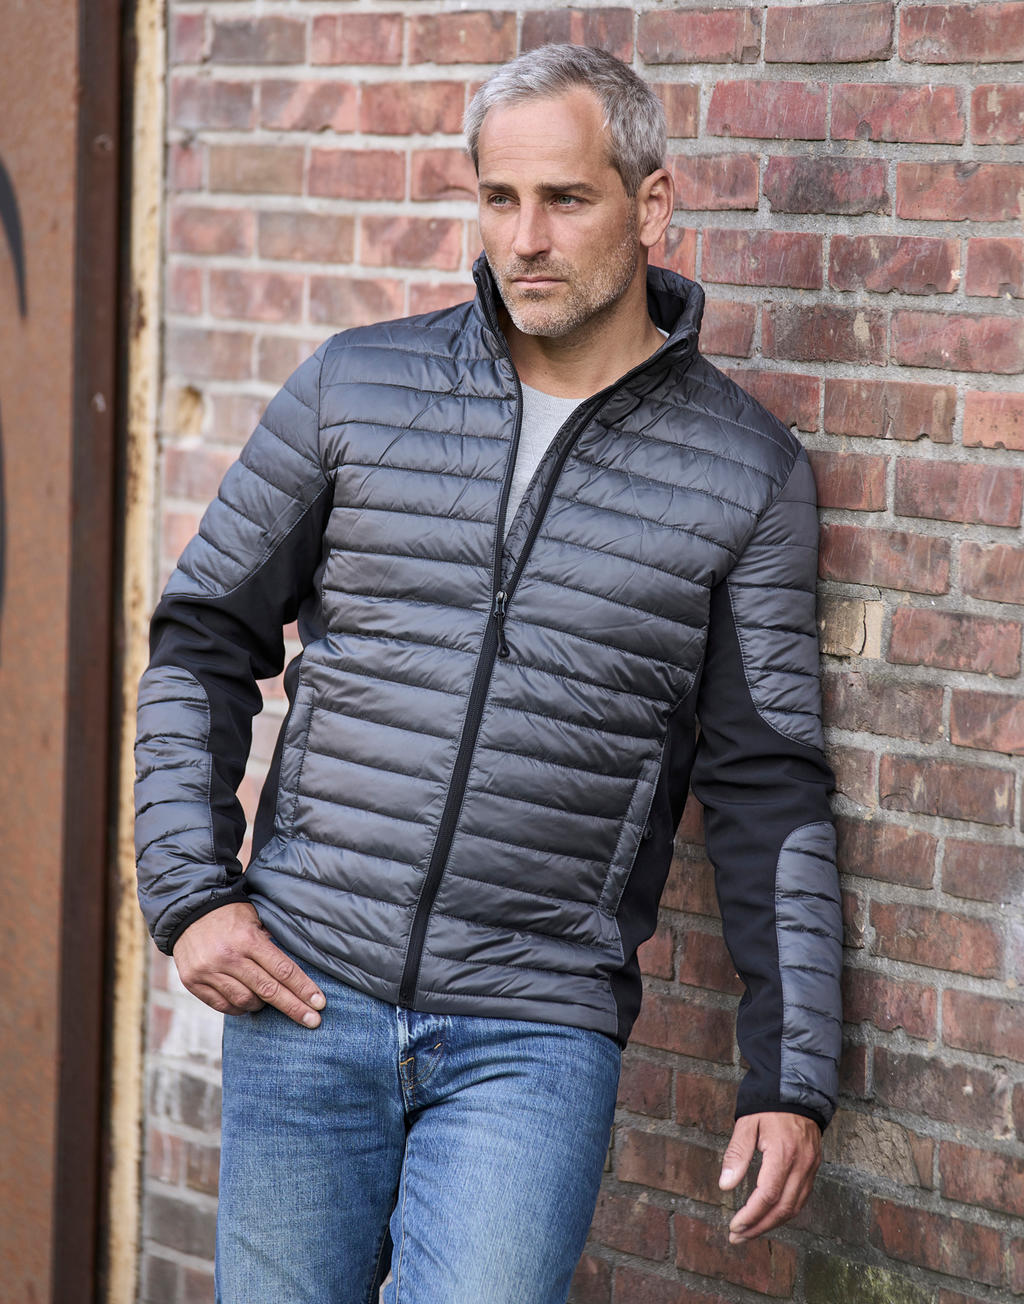  Crossover Jacket in Farbe Space Grey/Black